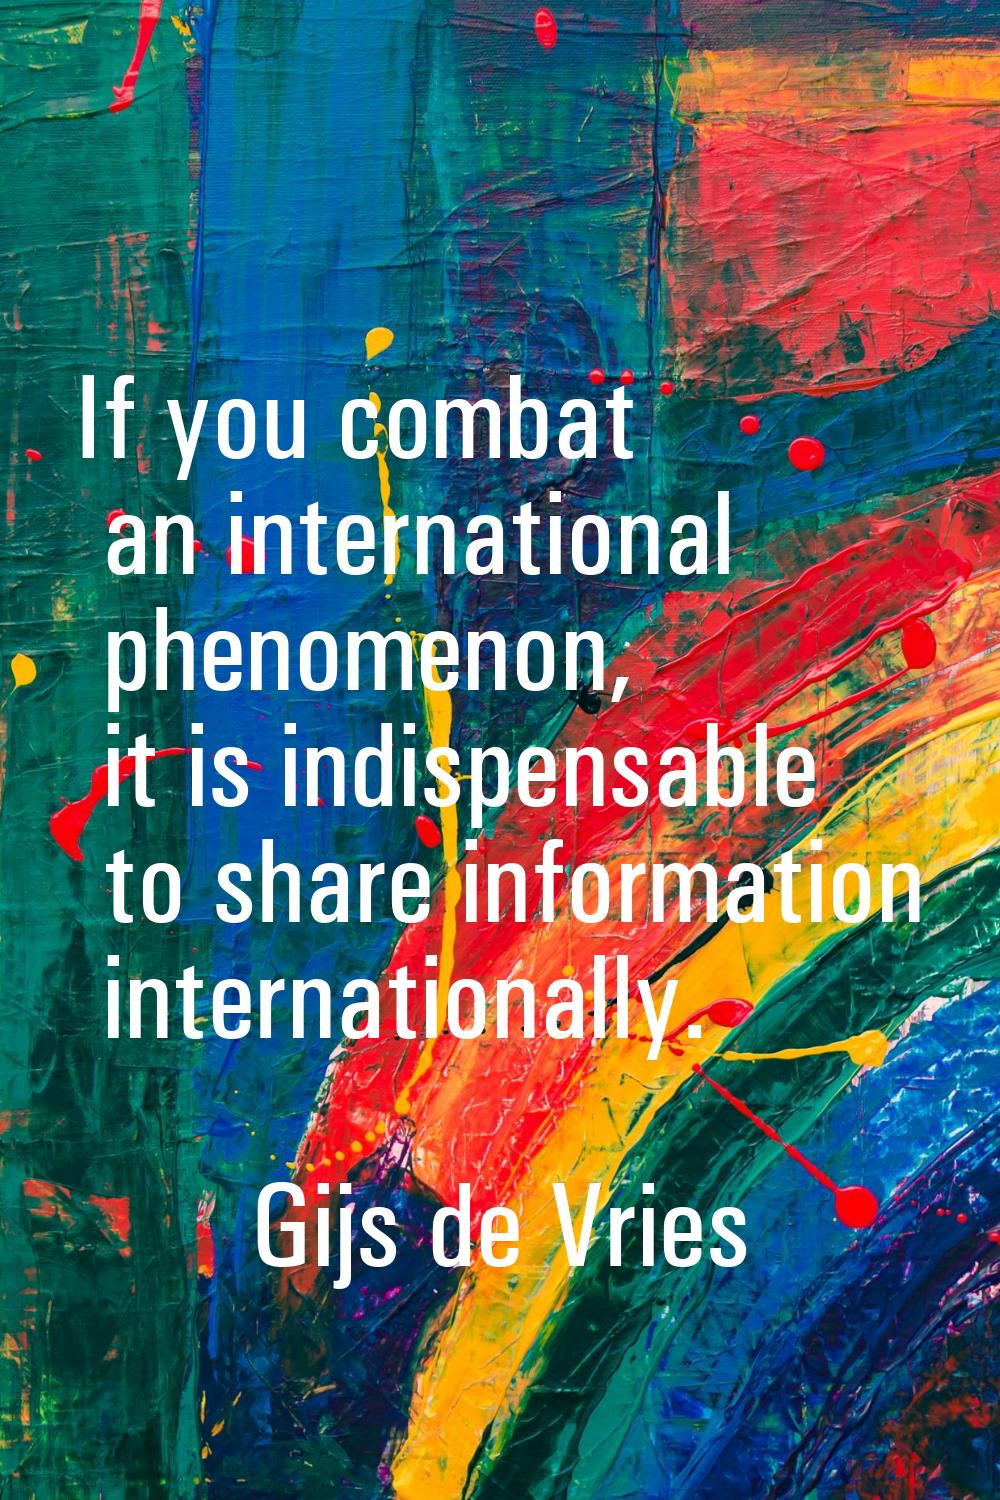 If you combat an international phenomenon, it is indispensable to share information internationally